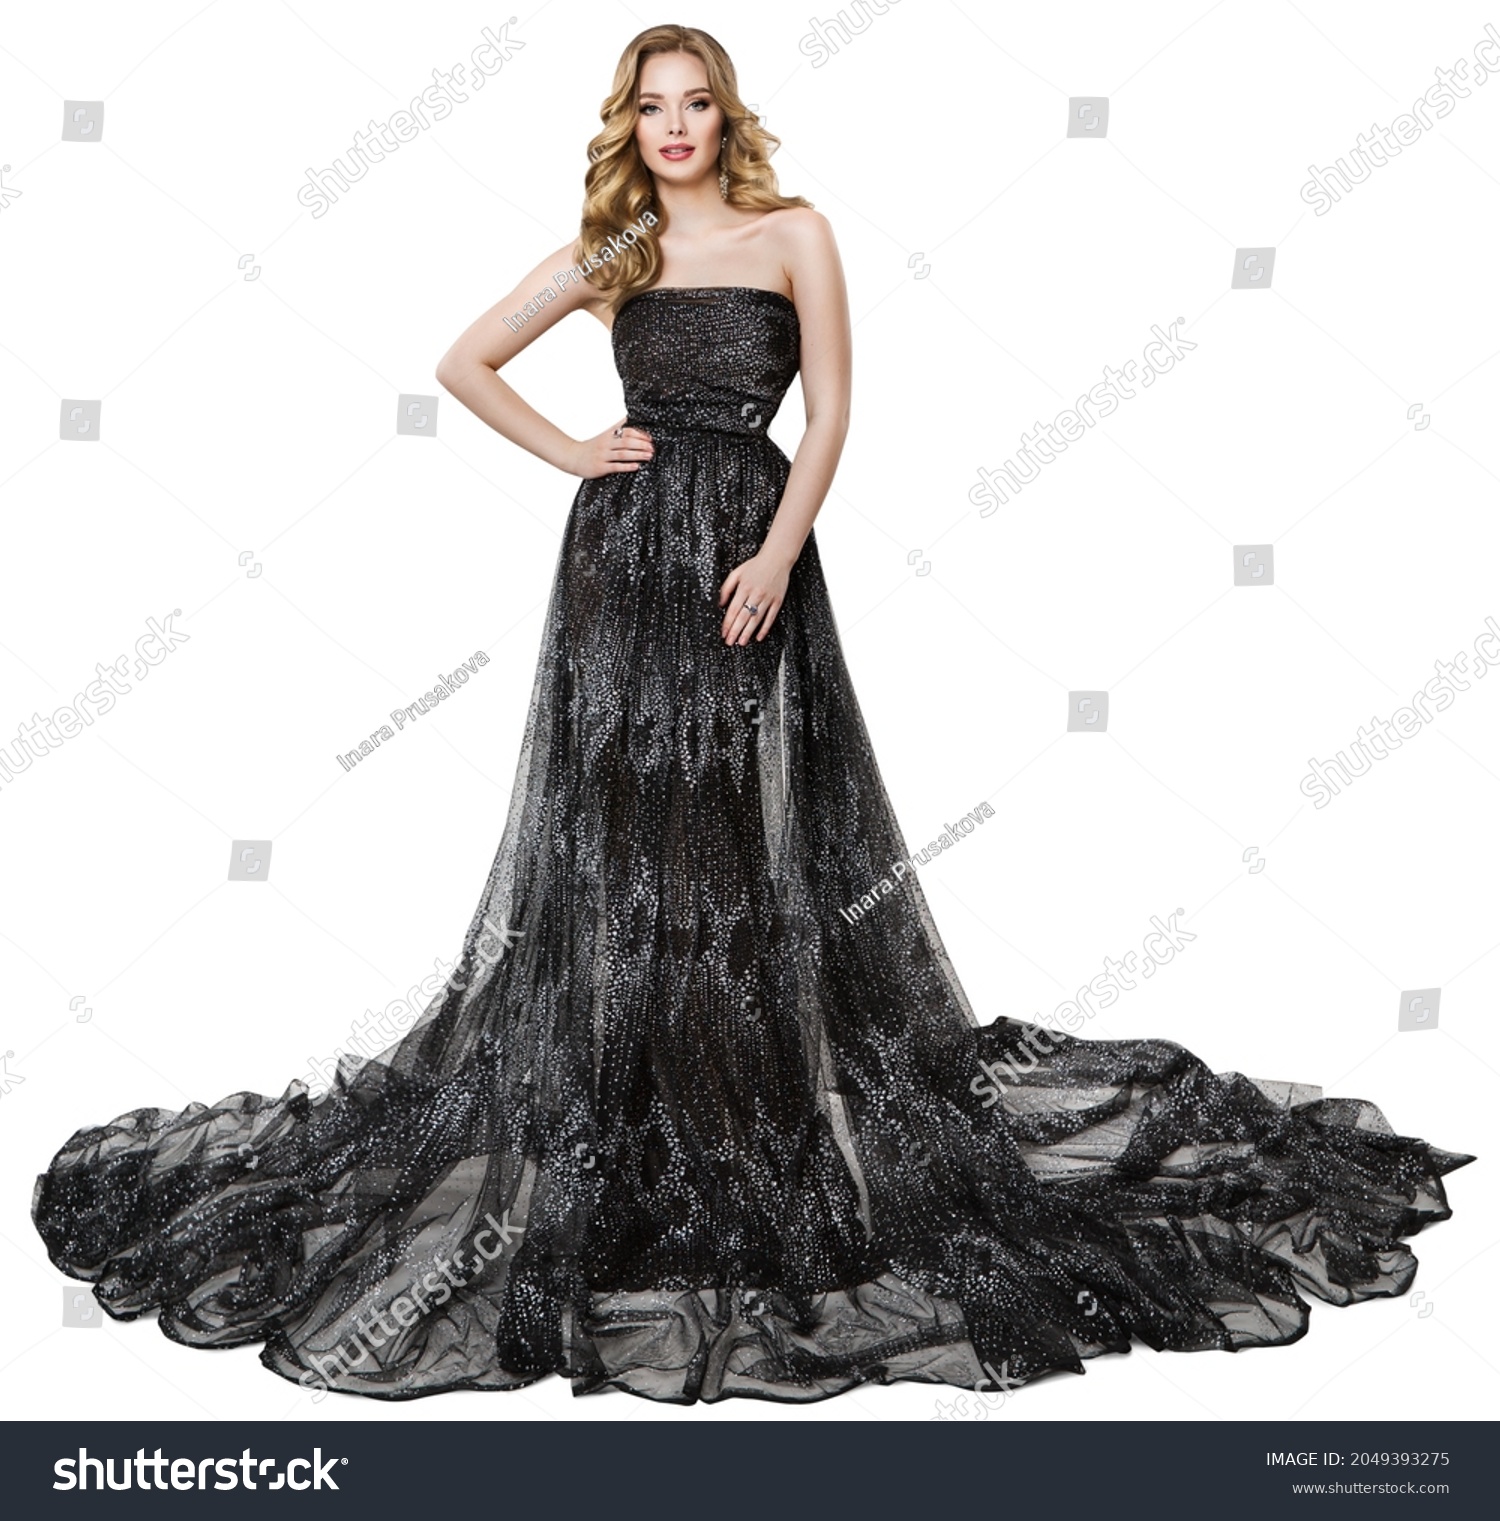 Fashion Model in Long Black Dress. Stylish Woman with Perfect Curly Hairstyle and Make up in Sparkling Holiday Luxury Gown over Isolated White #2049393275